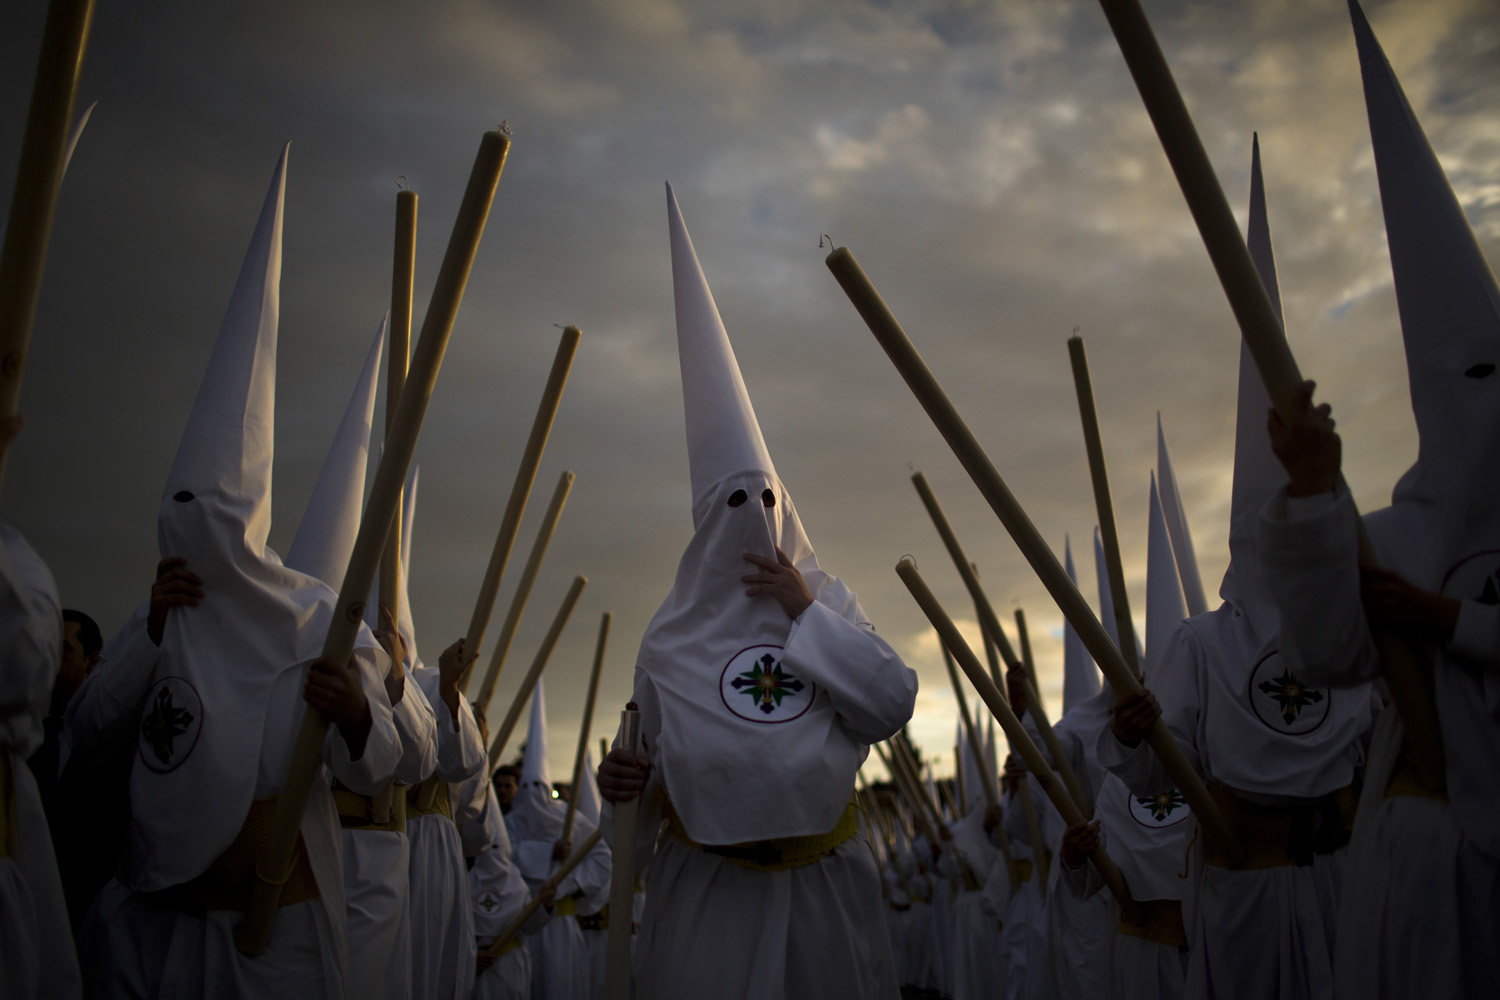 March 25, 2013. Penitents from  San Gonzalo  brotherhood take part in a procession in Seville, Spain. Hundreds of processions take place throughout Spain during the Easter Holy Week.